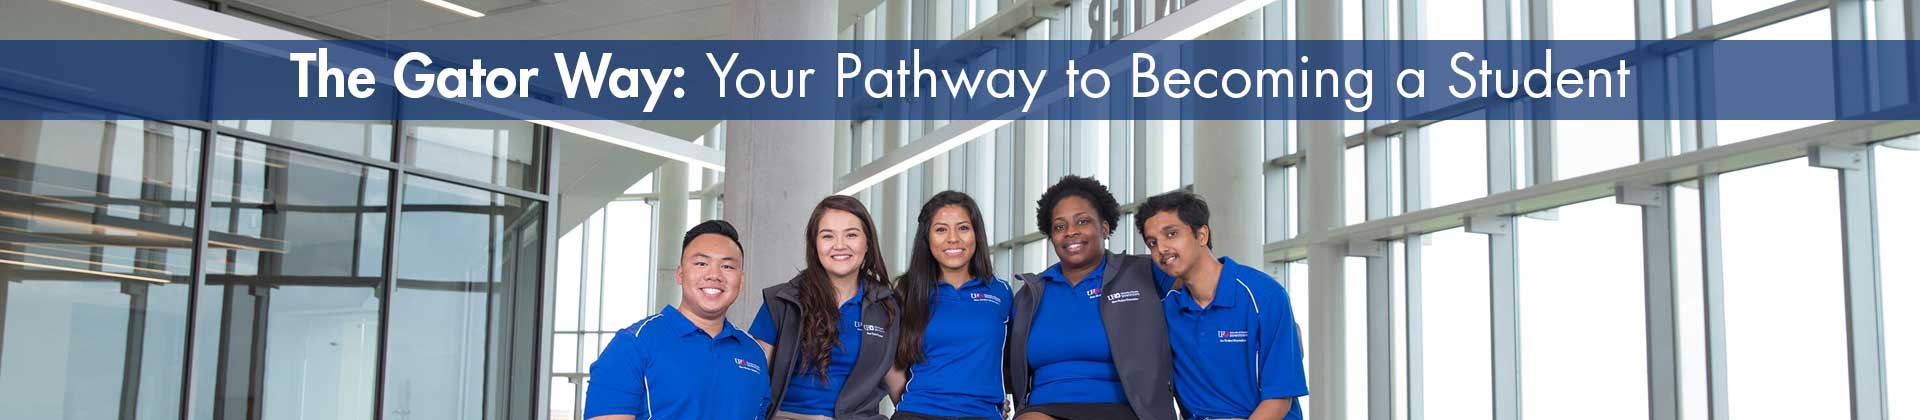 The Gator Way: Your Pathway to Becoming a Student